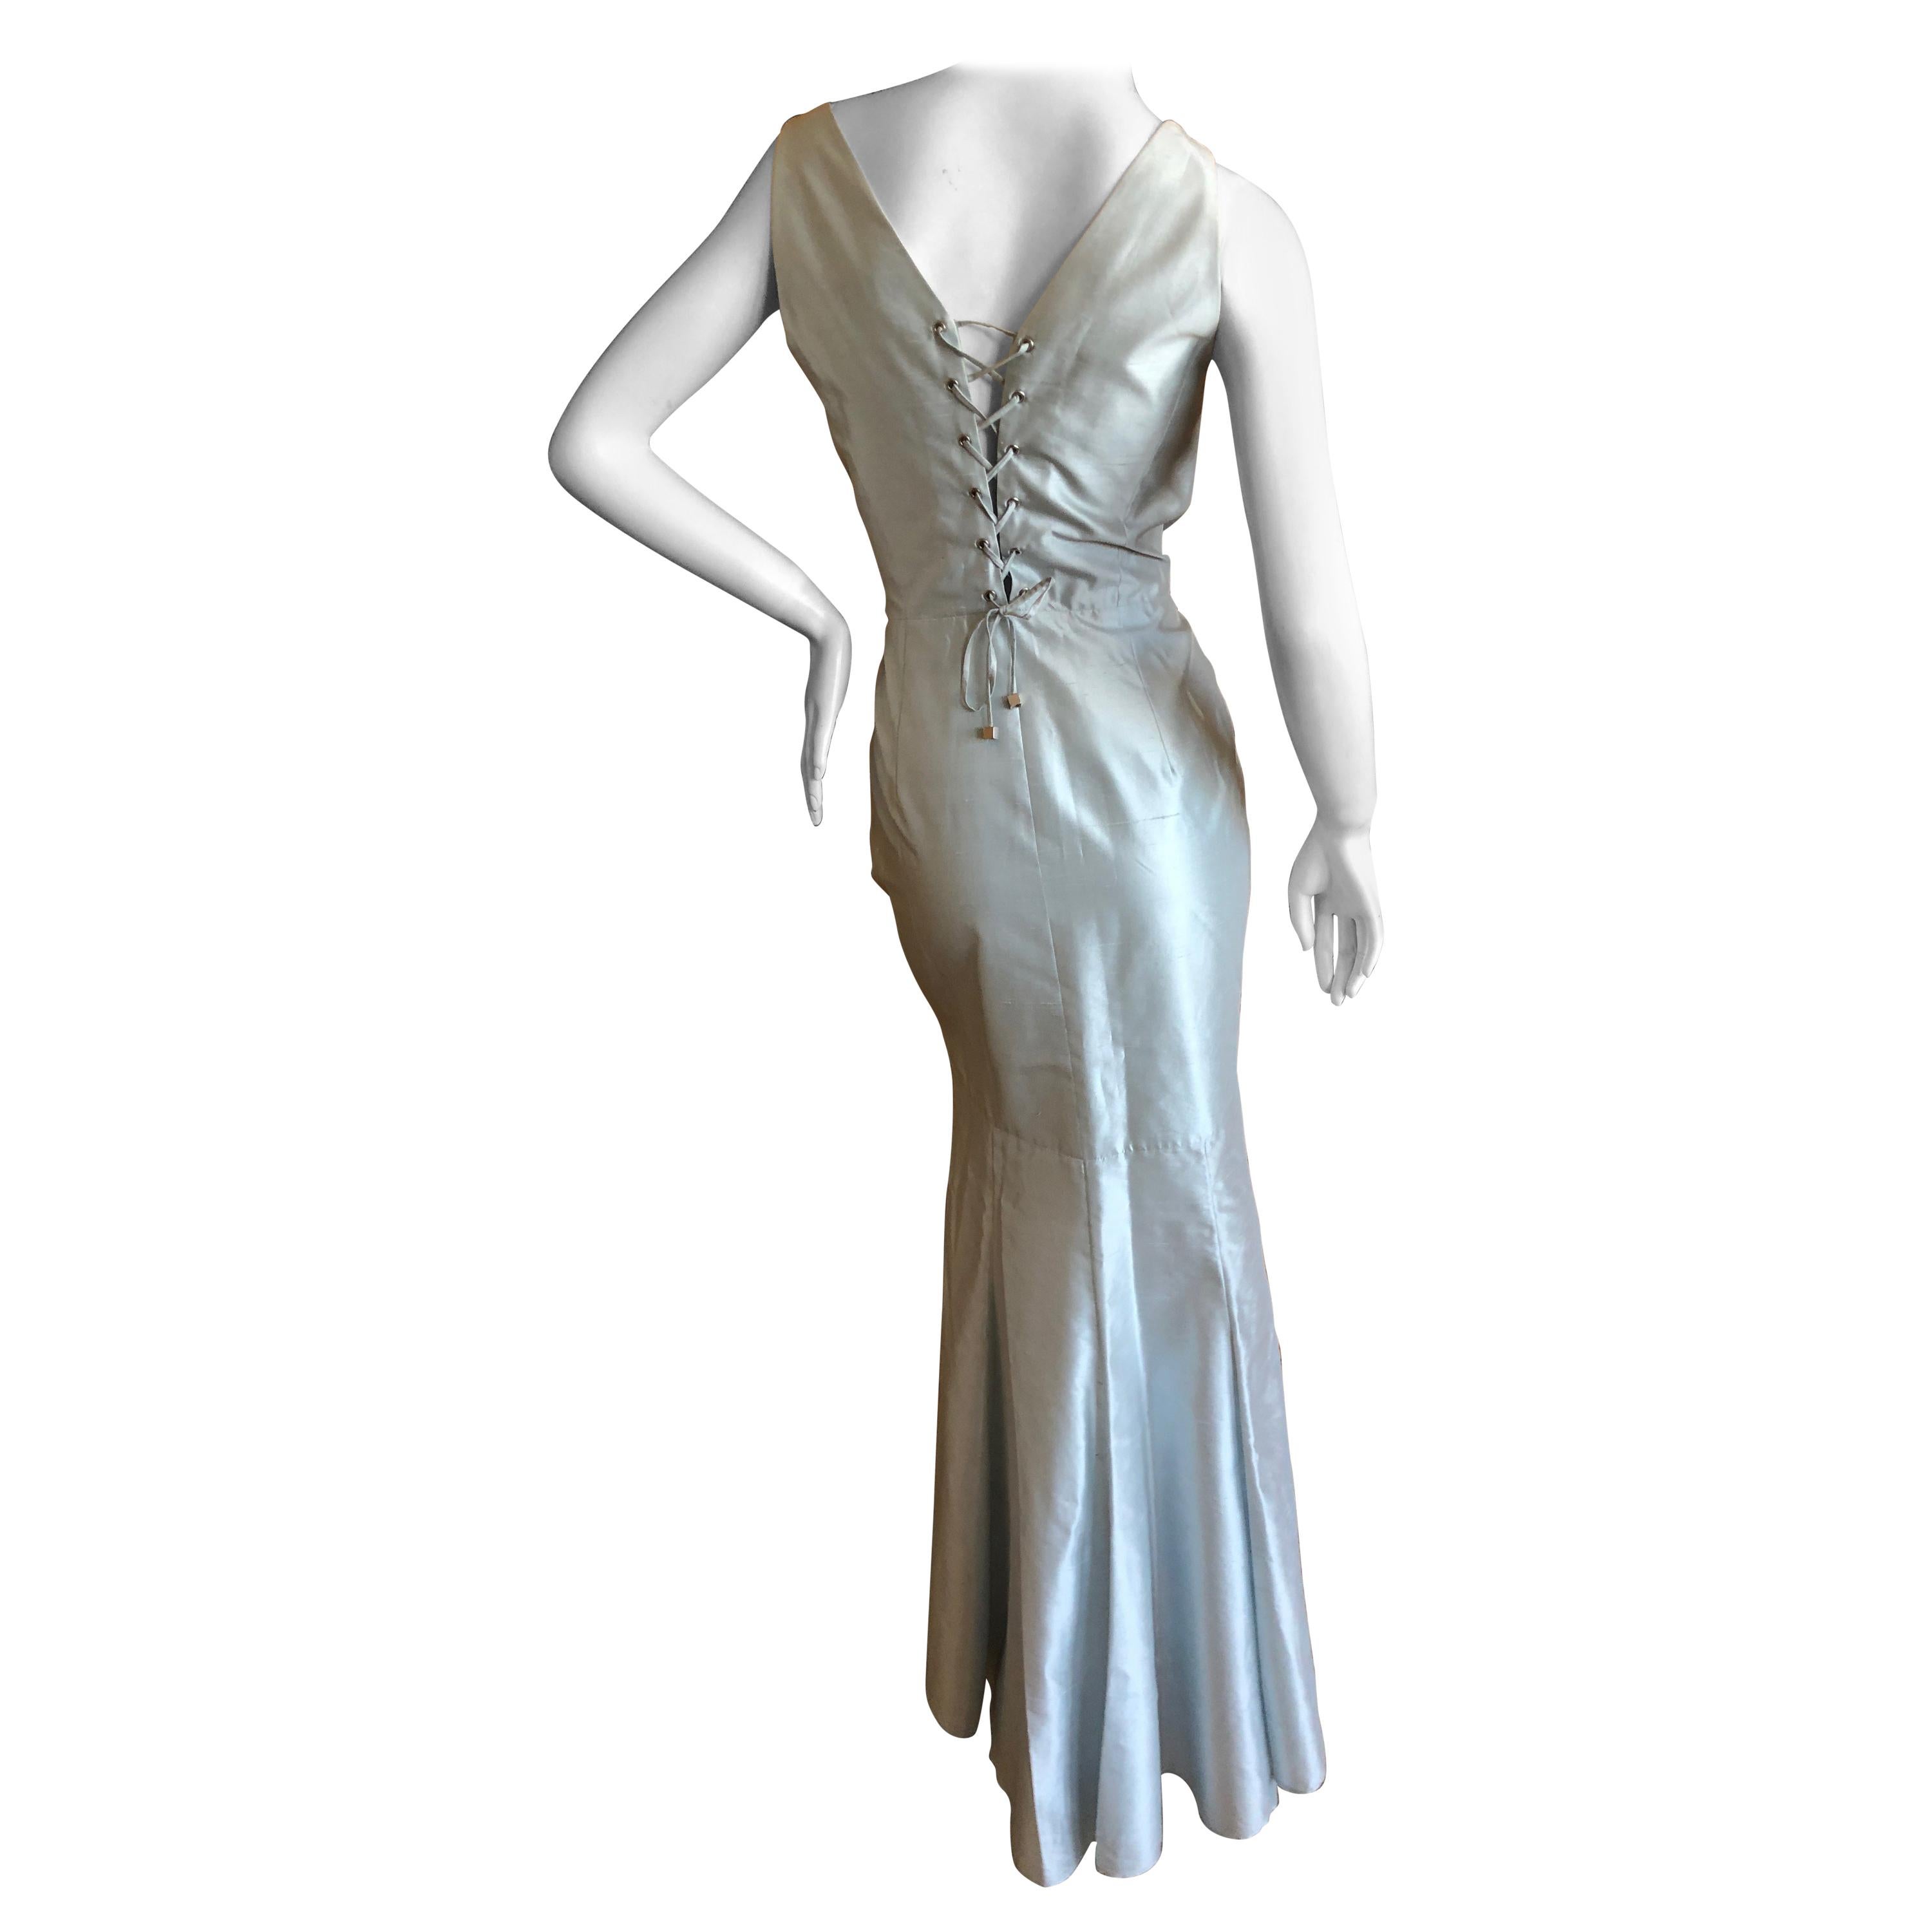 Thierry Mugler Couture Vintage 1980's Dupioni Silk Lace Up Evening Dress  For Sale